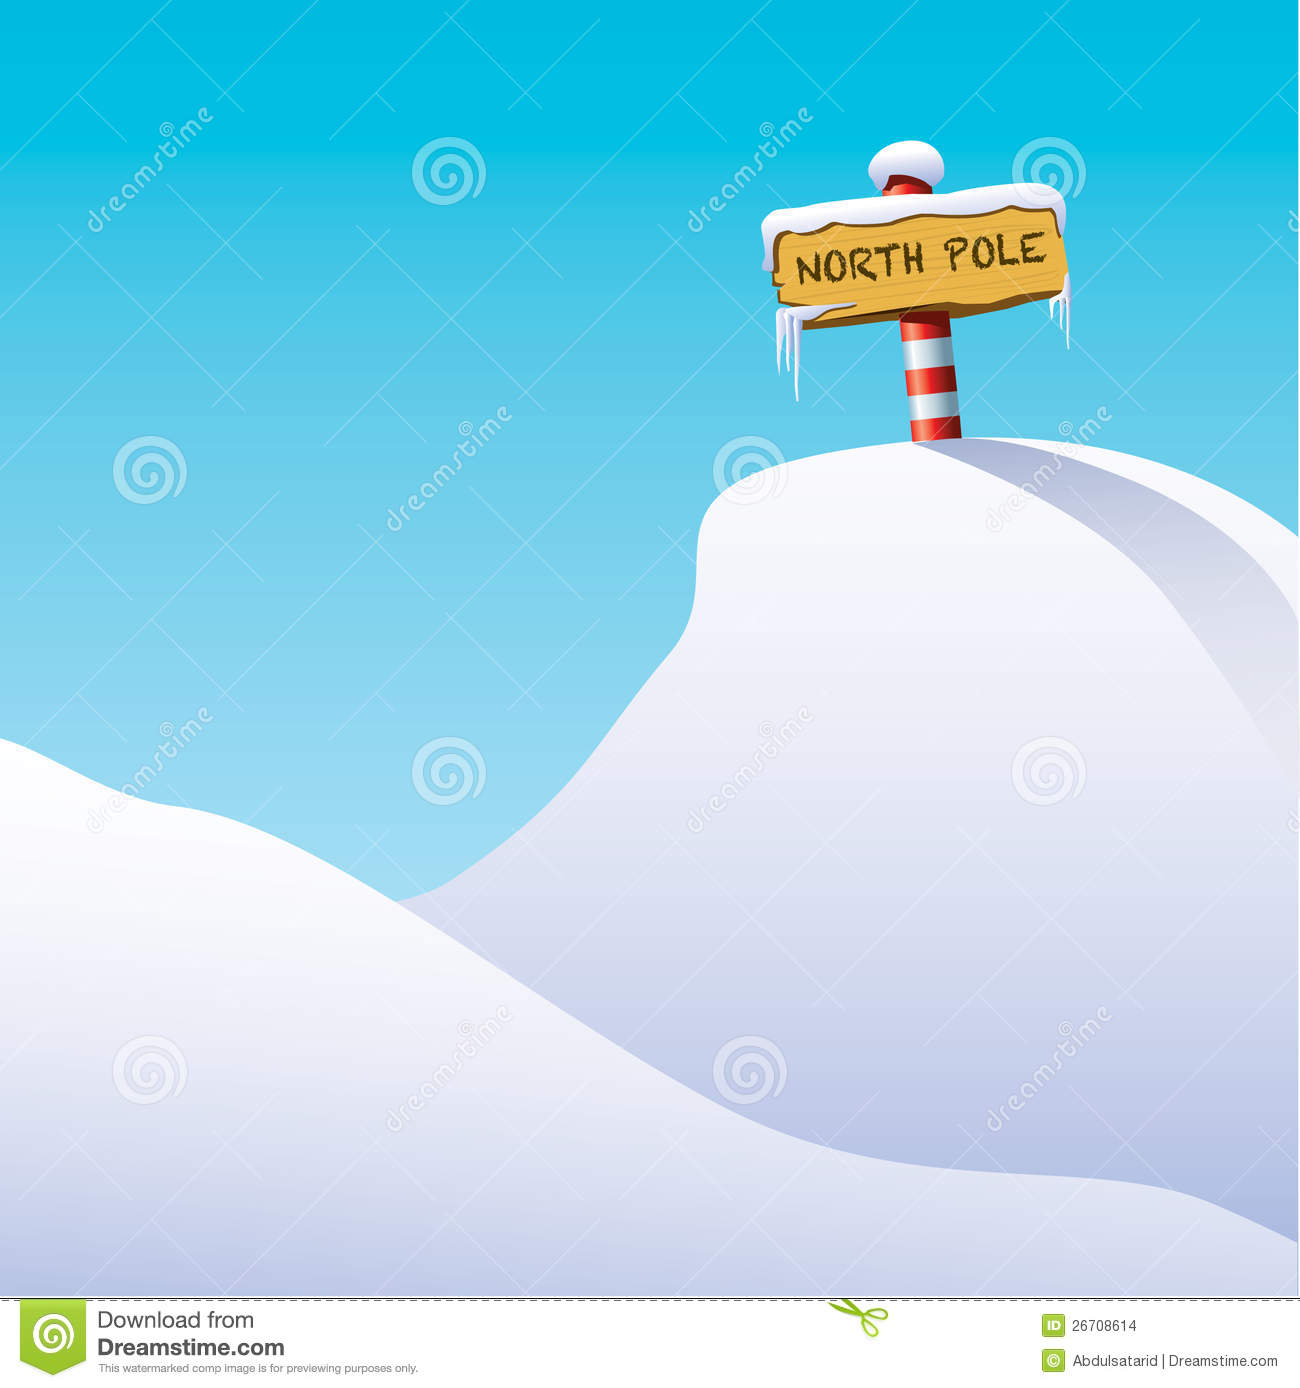 Illustration Of The North Pole With A Red And White Striped Post Stuck